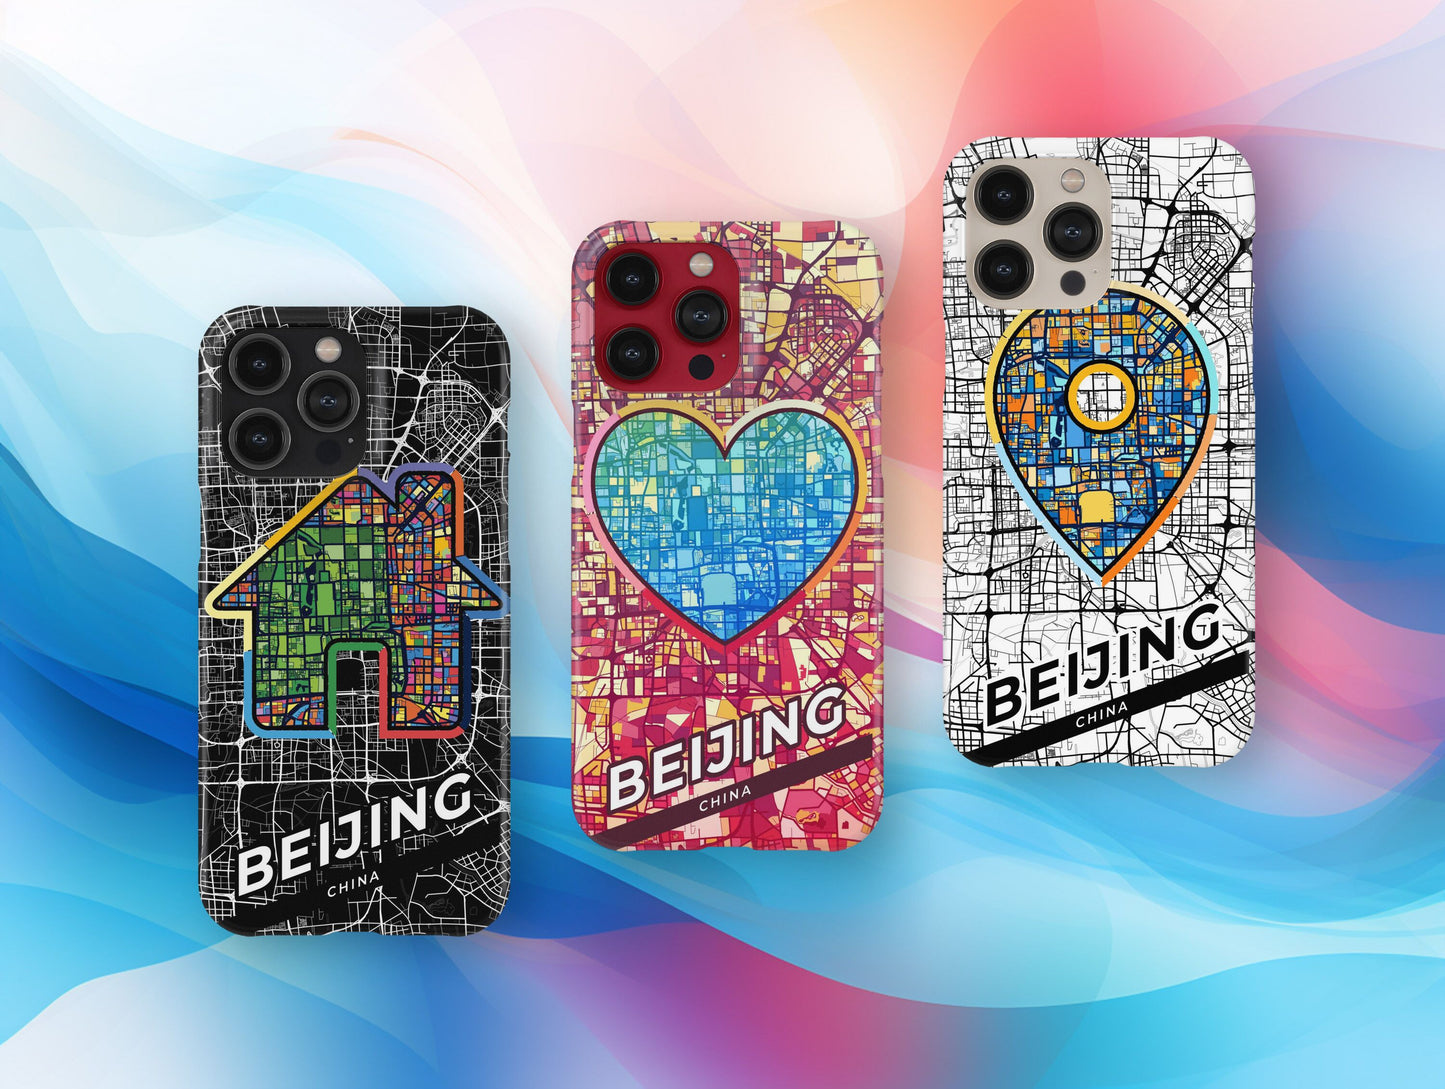 Beijing China slim phone case with colorful icon. Birthday, wedding or housewarming gift. Couple match cases.